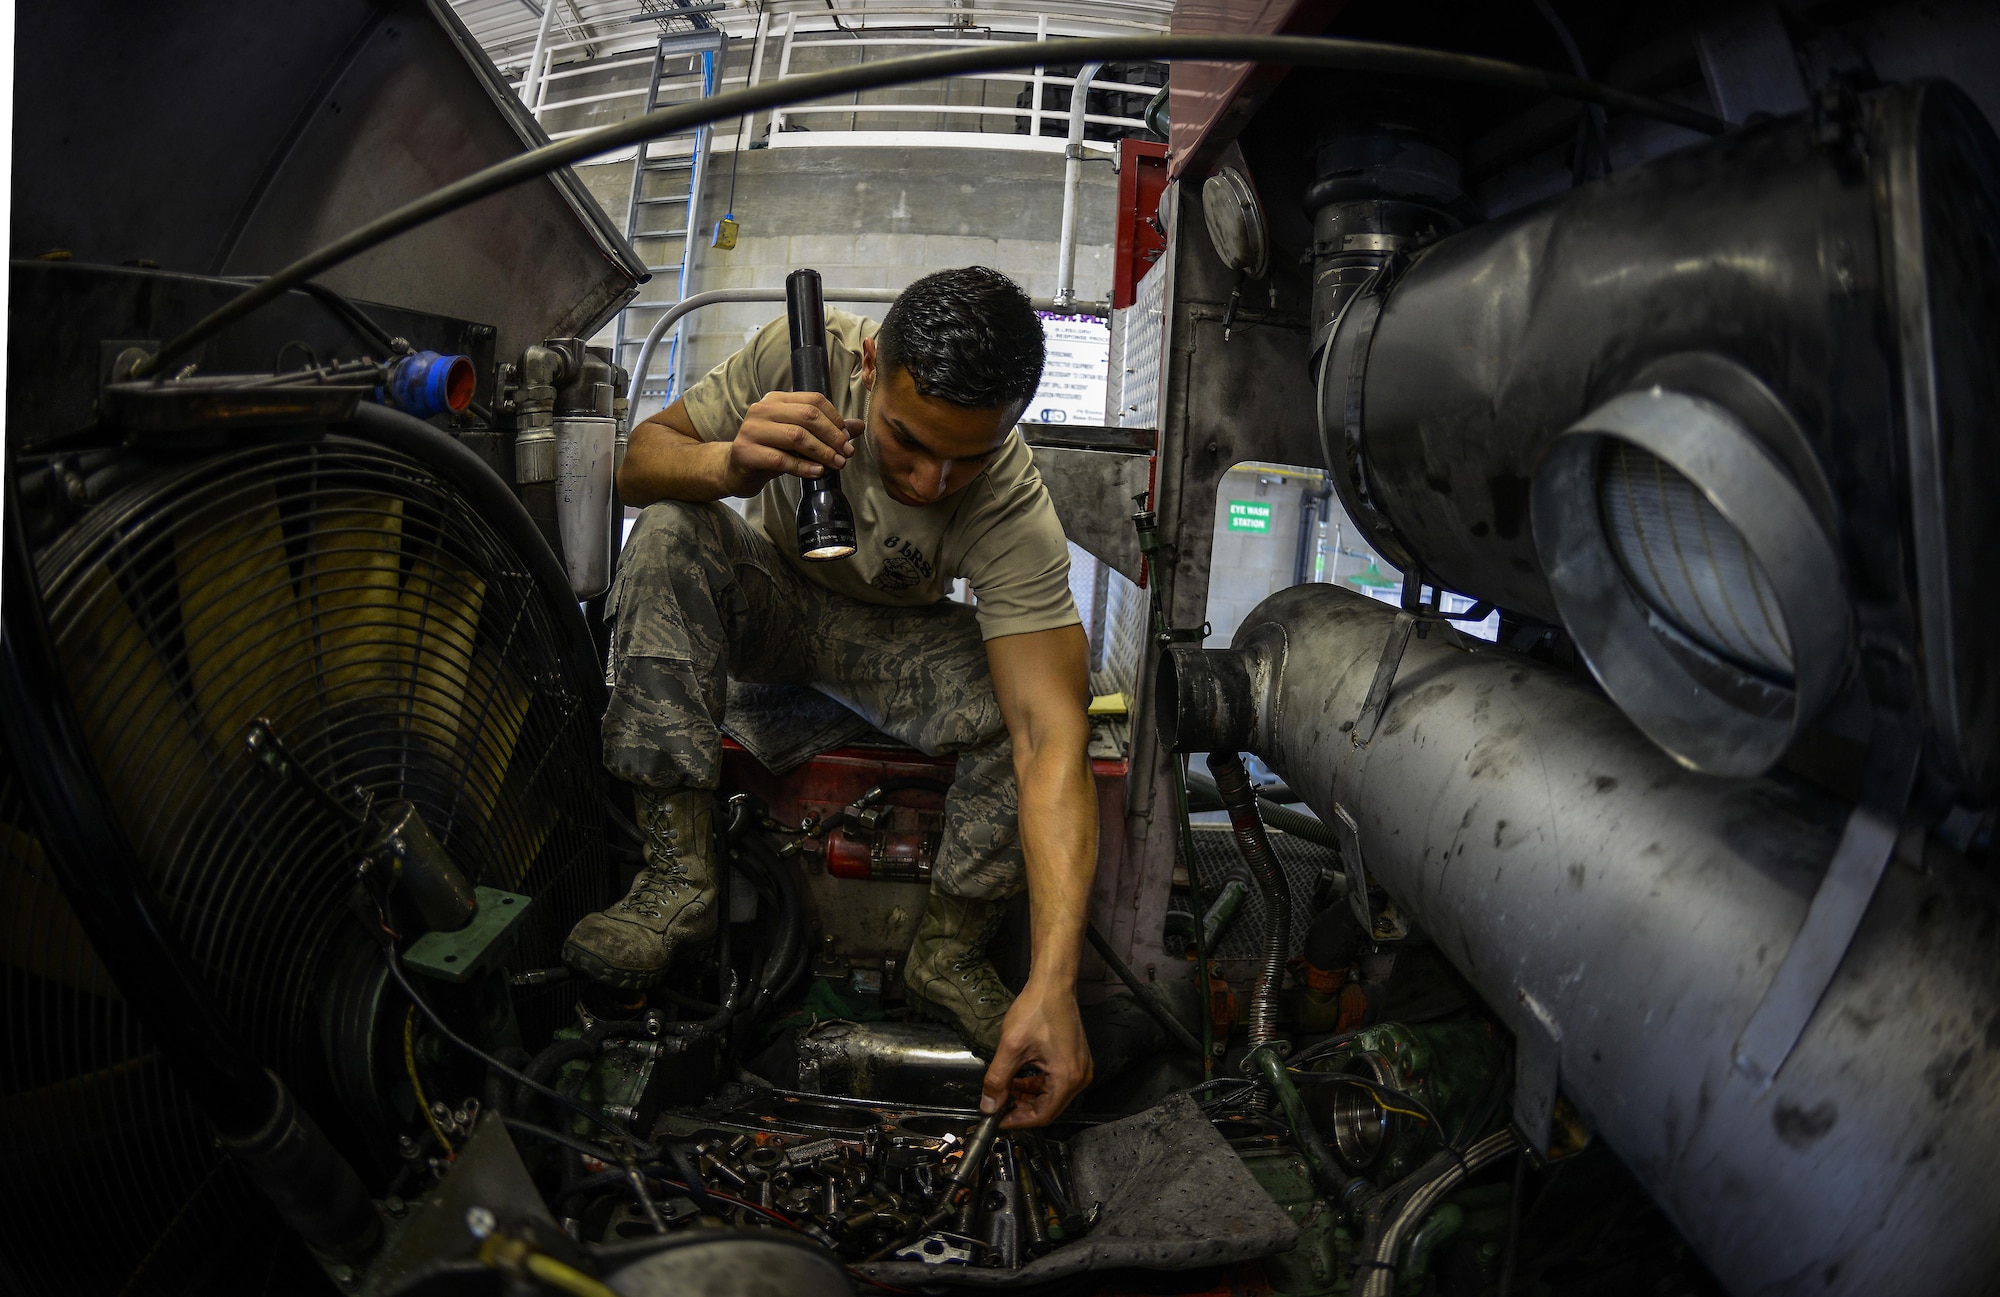 Senior Airman William Concepcion, a 6th Logistics Readiness Squadron fire truck mechanic, picks up an engine part from an airport rescue firefighting truck, May 7, 2015, at MacDill Air Force Base, Fla. The fire truck maintenance shop is responsible for maintaining 10 firefighting trucks. (U.S. Air Force photo/Senior Airman Melanie Bulow-Gonterman)